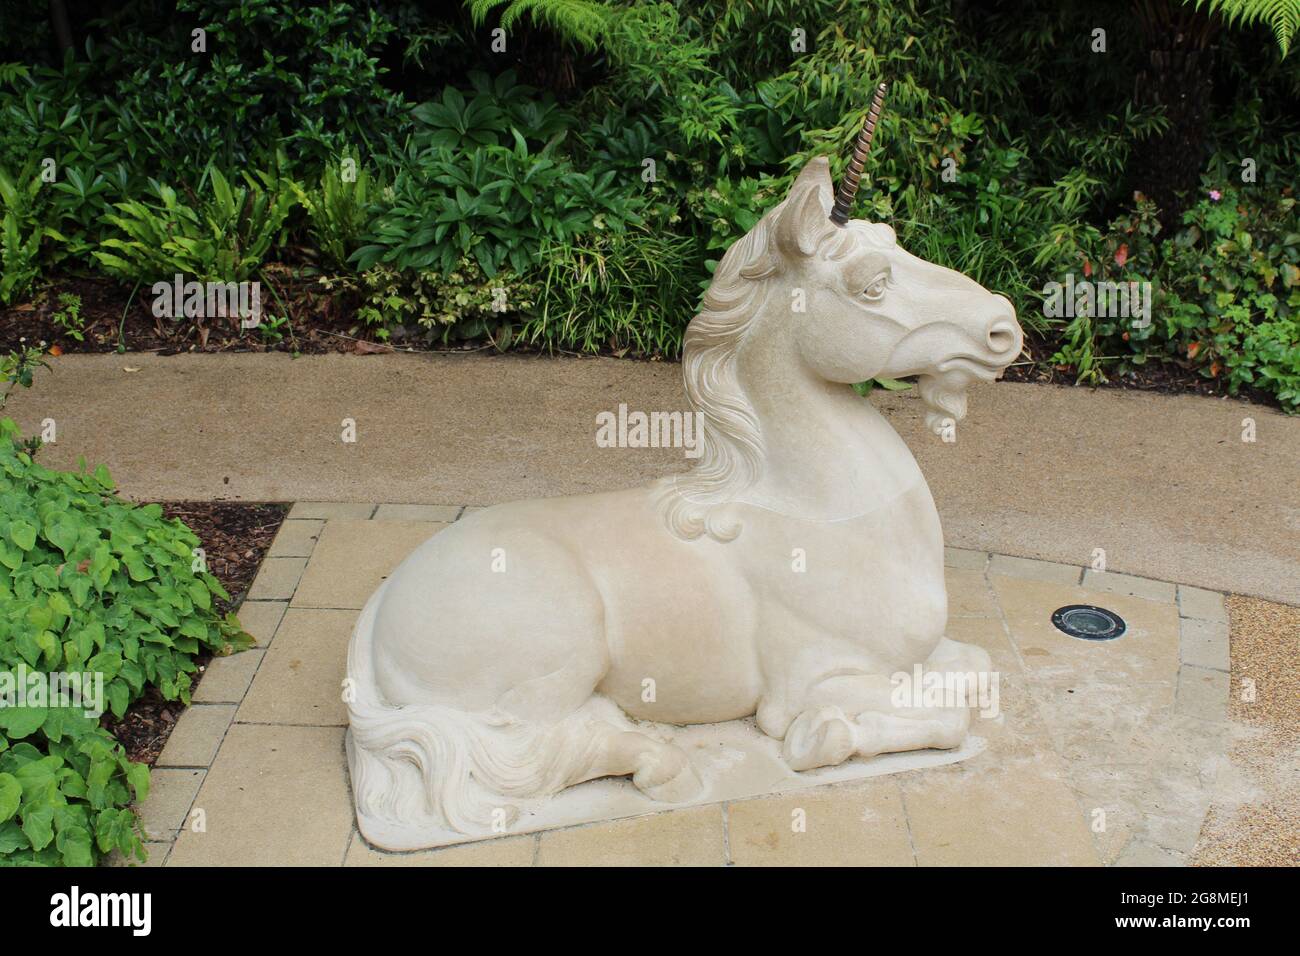 Unicorn sitting in on path of a garden Stock Photo